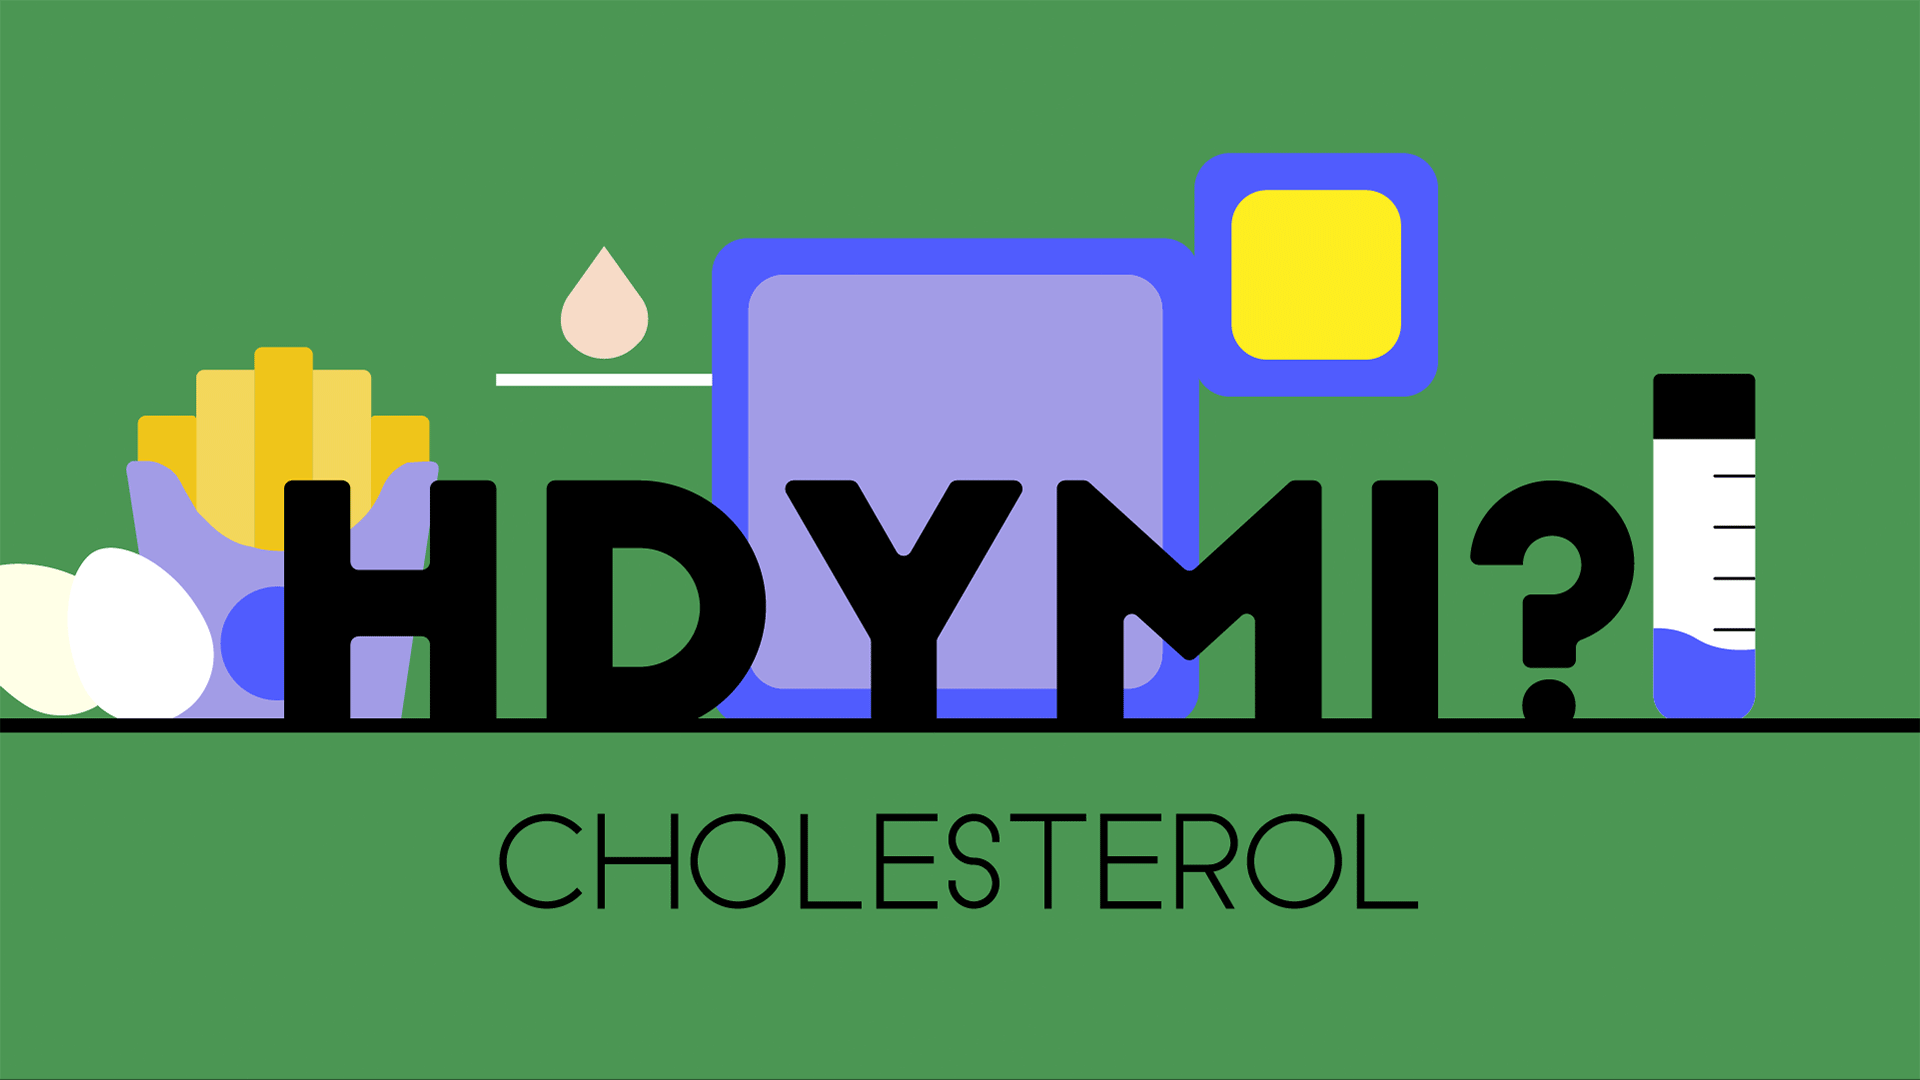 Animated illustration labeled "HDYMI? Cholesterol" shows french fries and eggs alongside a drop of liquid entering a device and making test results appear.